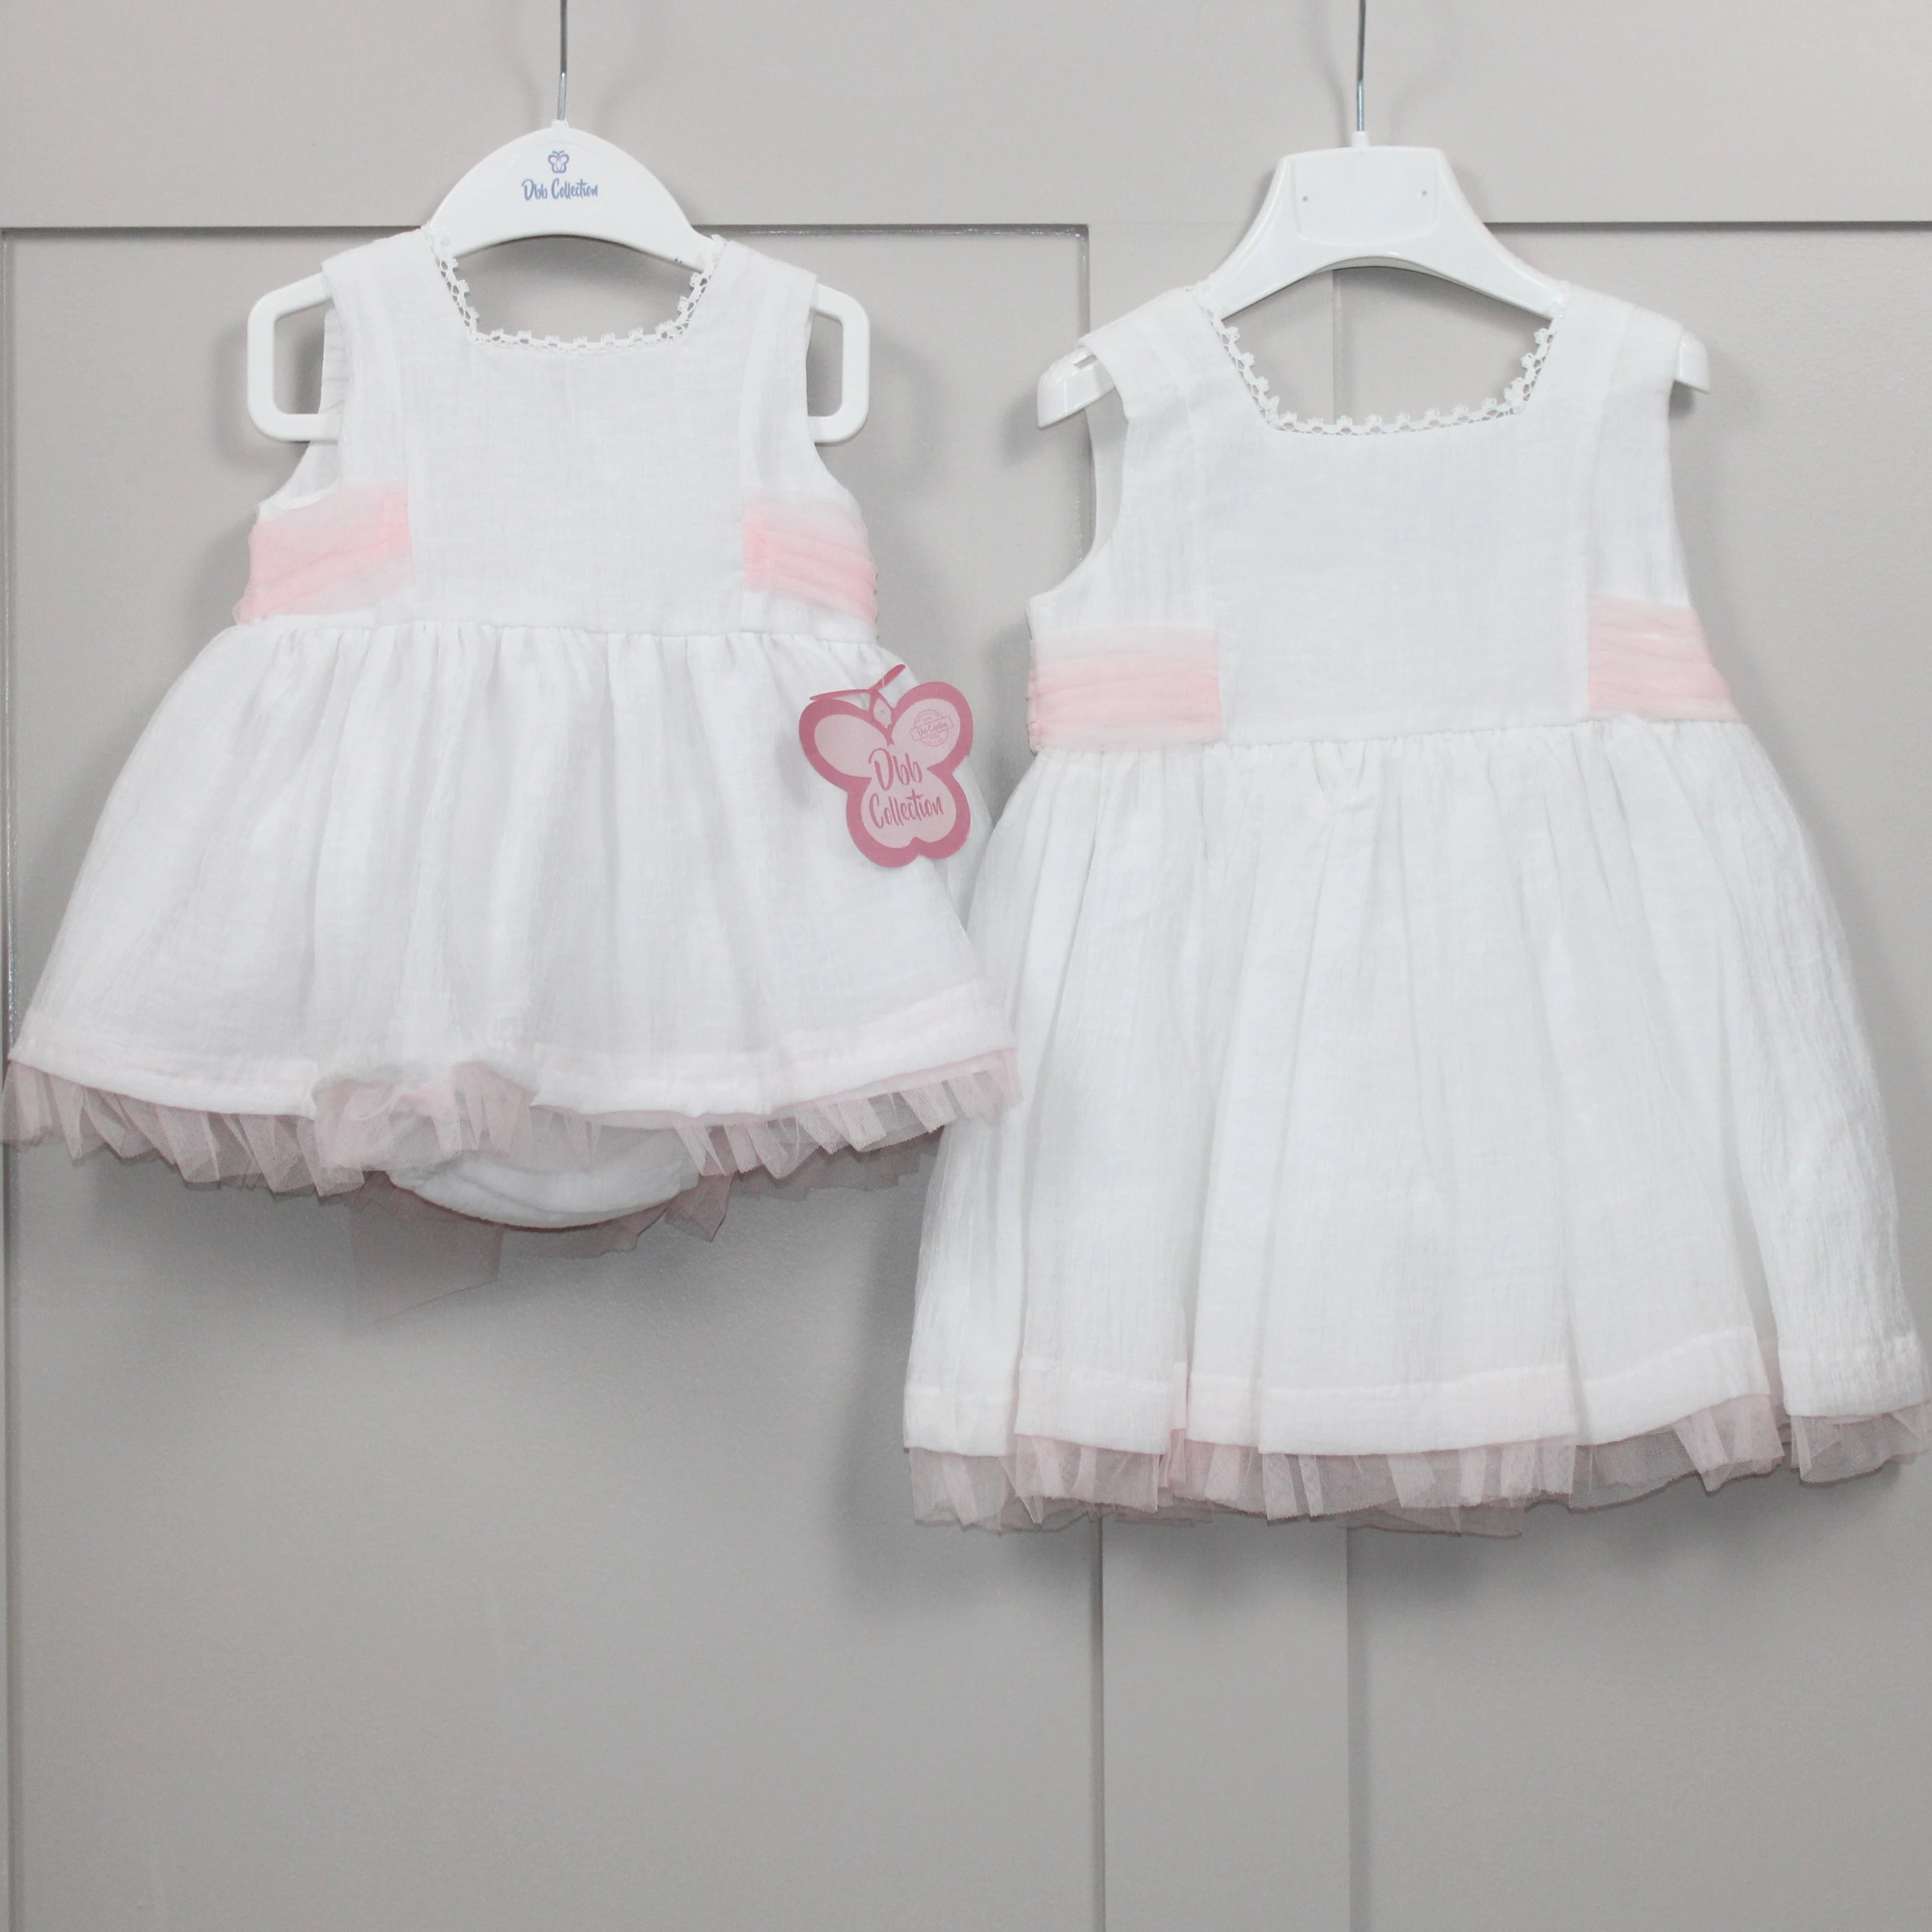 dbb collections white summer dress with pink tulle waist band and bow